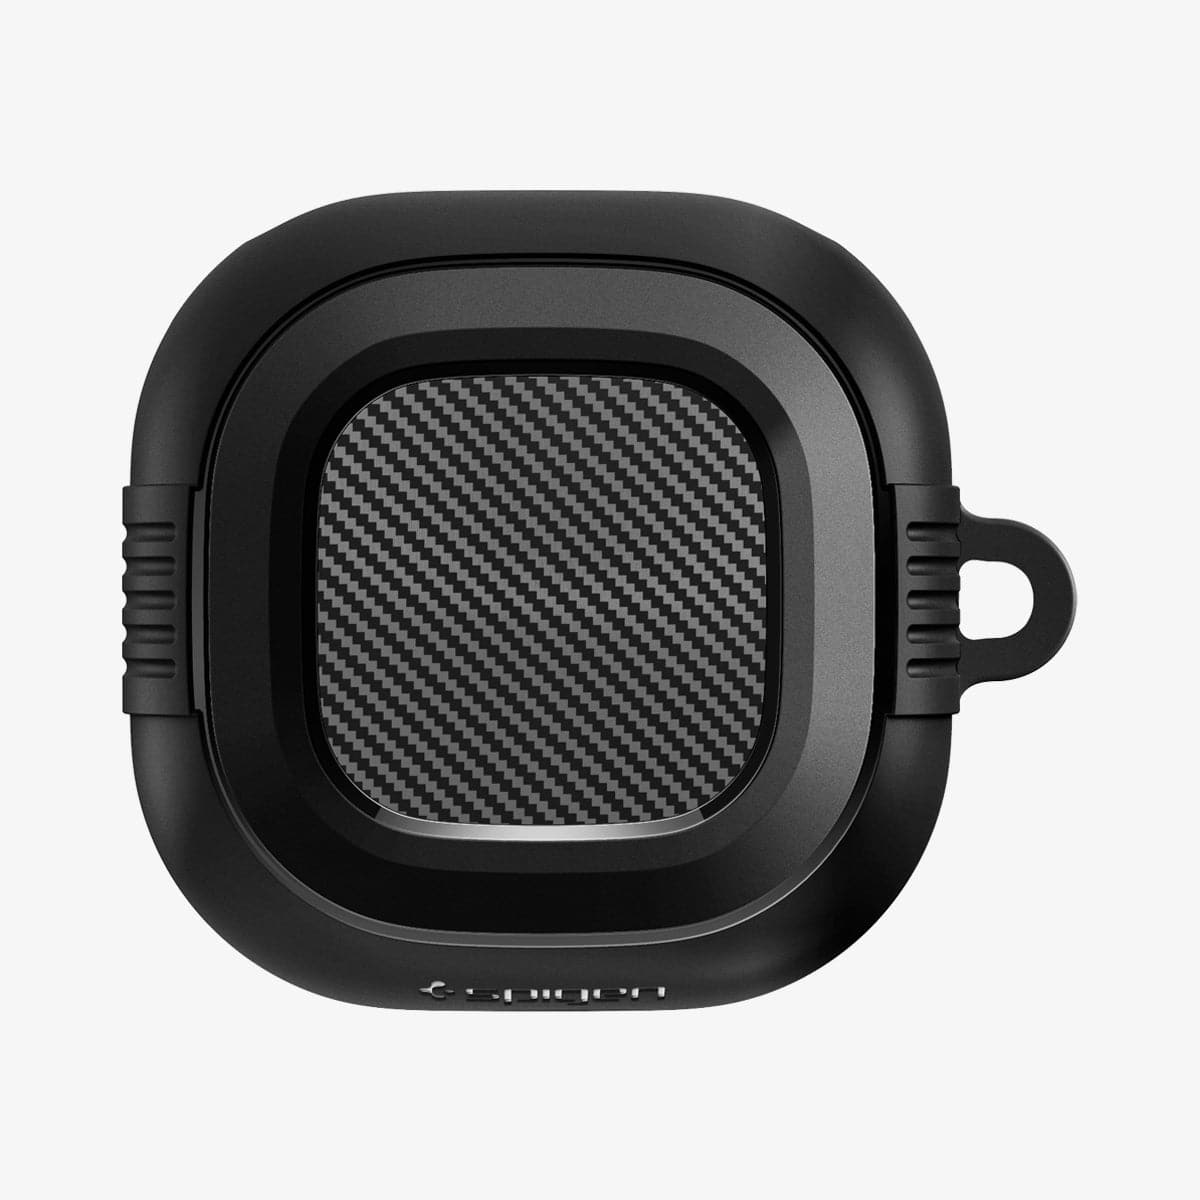 ASD01276 - Galaxy Buds 2 Pro / 2 / Pro / Live Case Rugged Armor in matte black showing the top